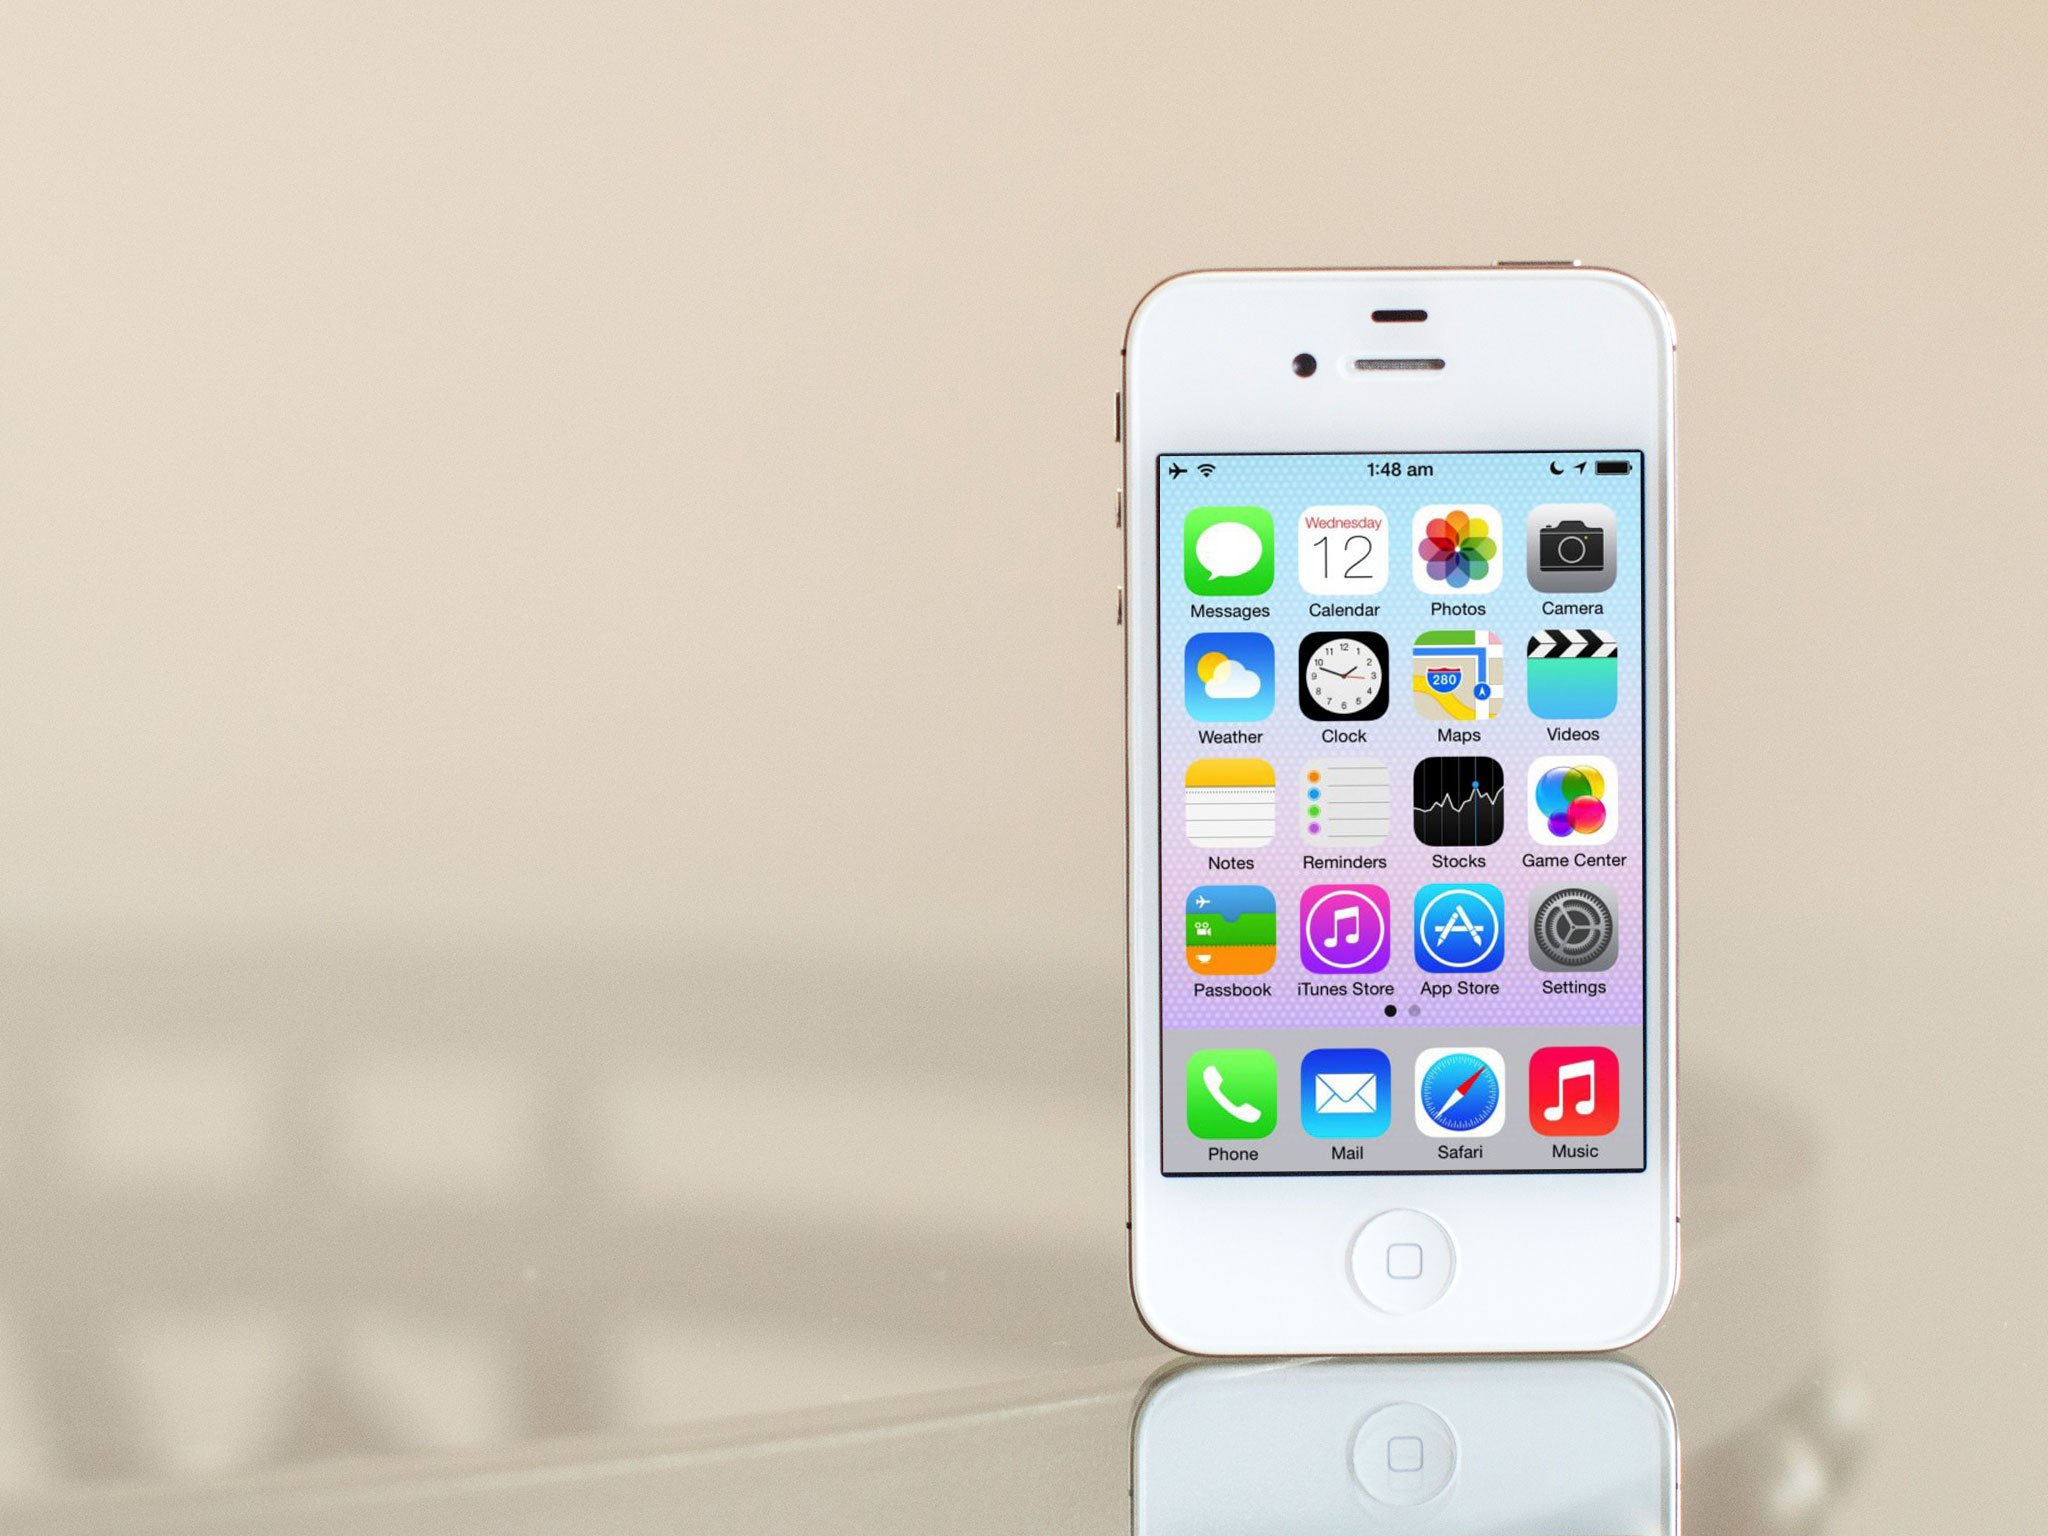 Top 5 tips to speed up an iPhone 4 or iPhone 4s running iOS 7  iMore